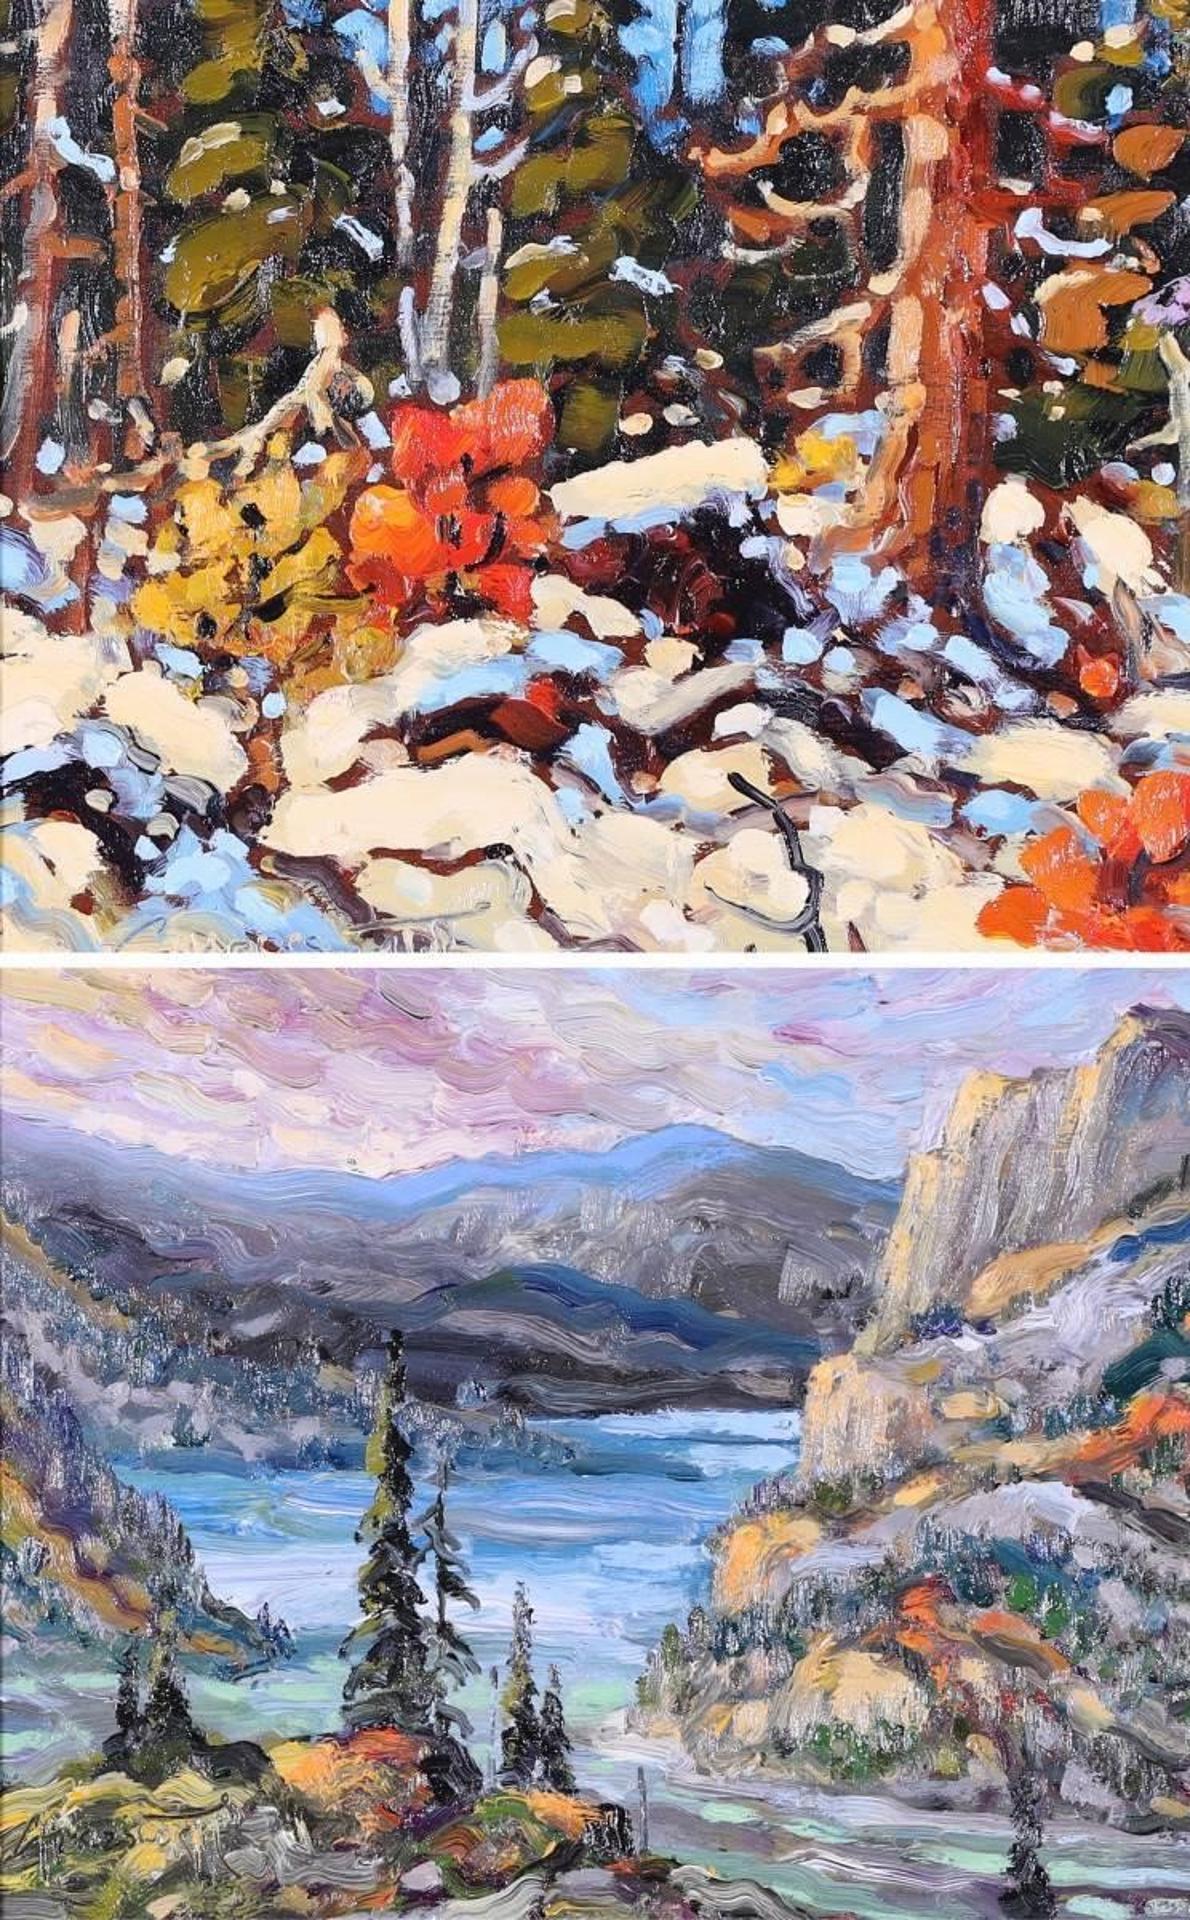 Rod Charlesworth (1955) - November Woods / Early Autumn, Waterton (Double-Sided)